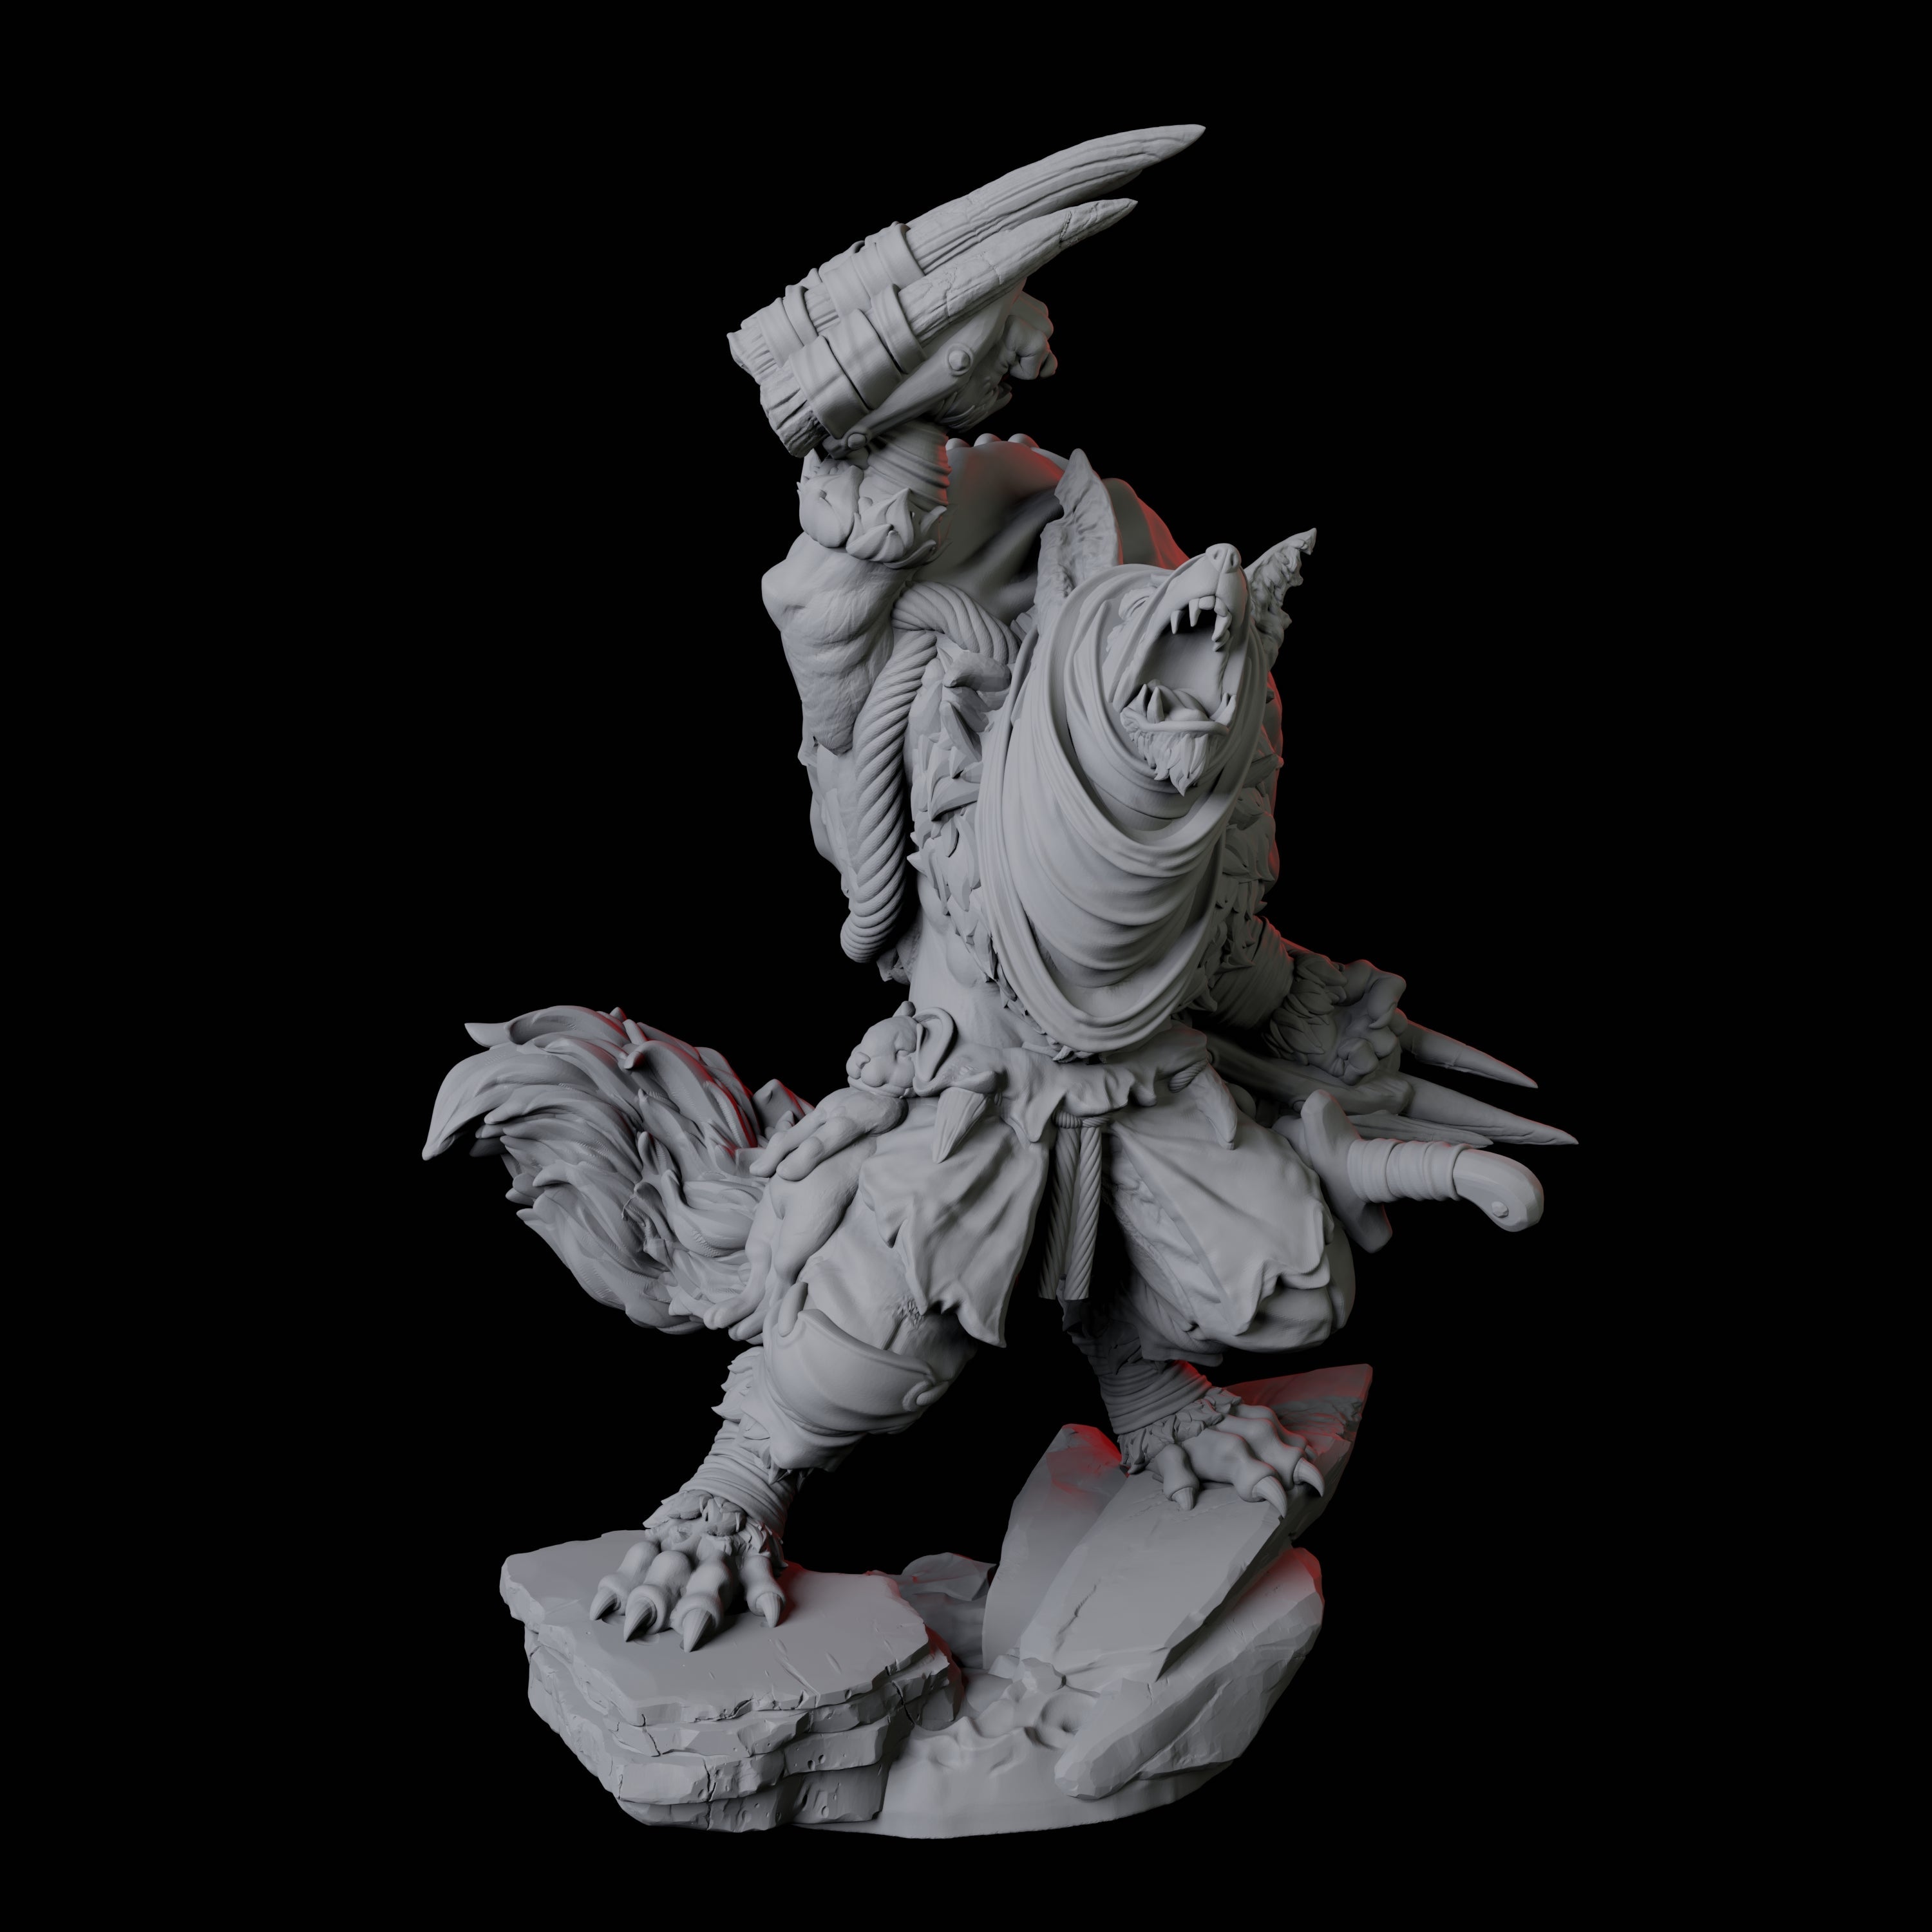 Cunning Kitsune Fighter C Miniature for Dungeons and Dragons, Pathfinder or other TTRPGs